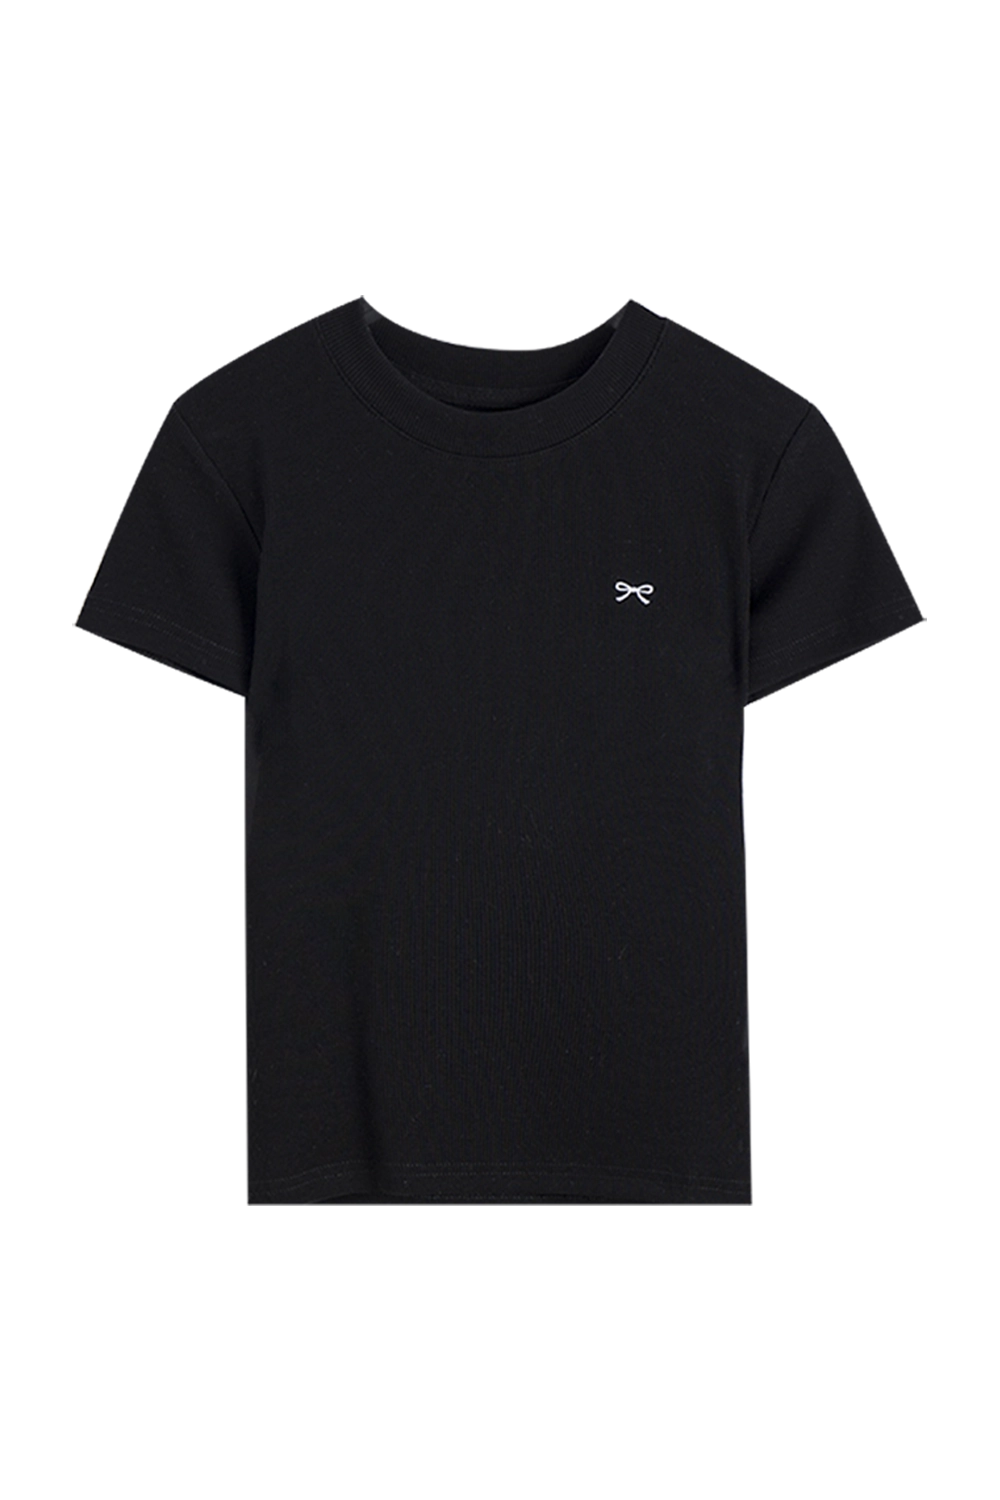 Women's Classic Black Tee with Petite Embroidery Detail